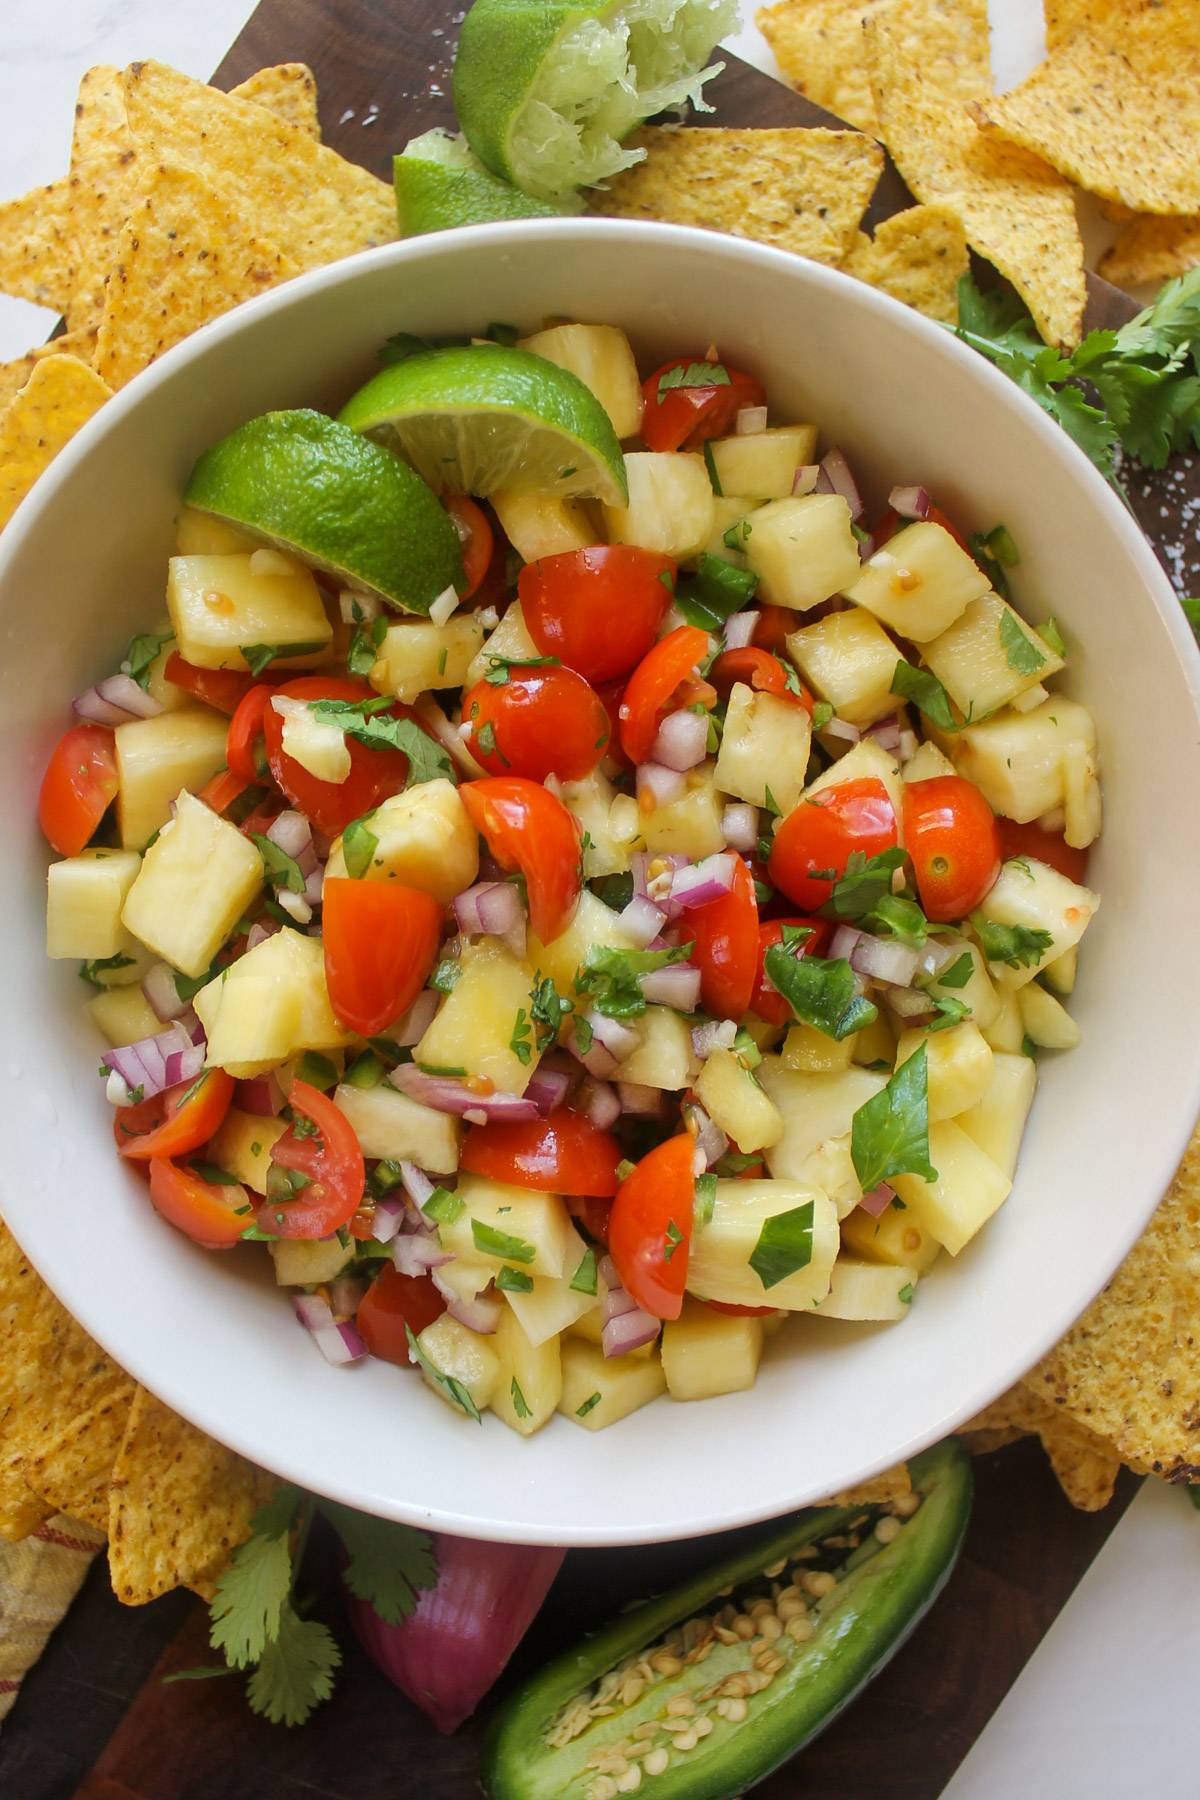 Pineapple pico de gallo salsa in a bowl for snacking with chips.